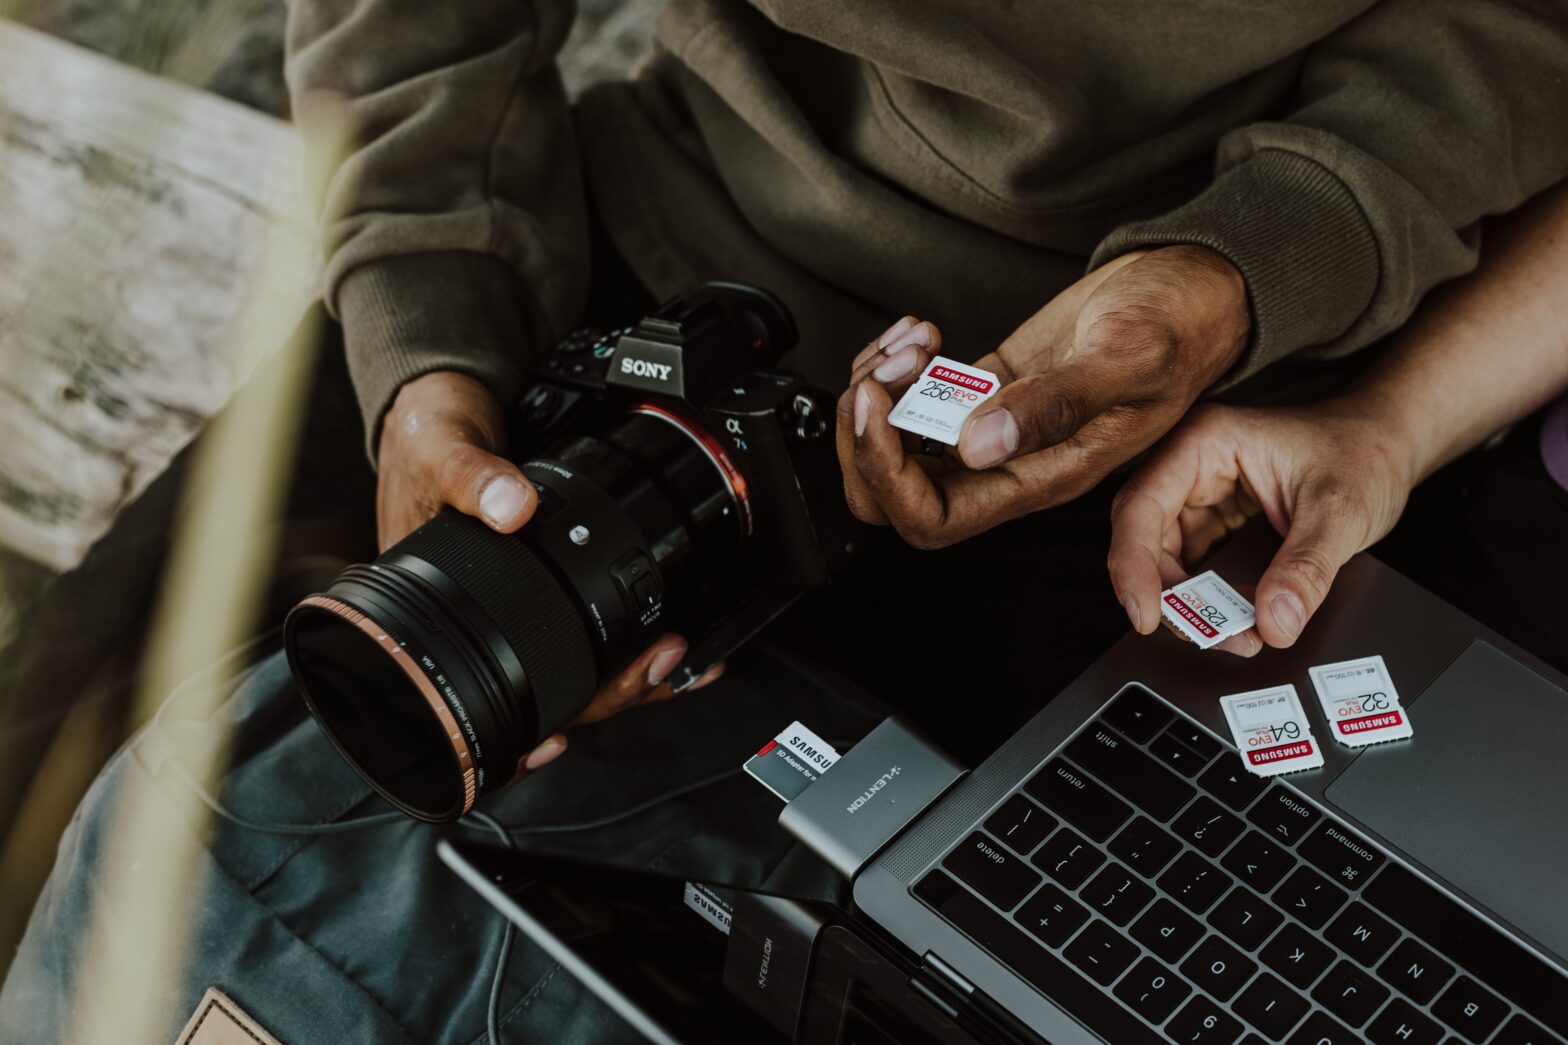 Level Up Your Travel Photography With These Content Creator Must-Haves